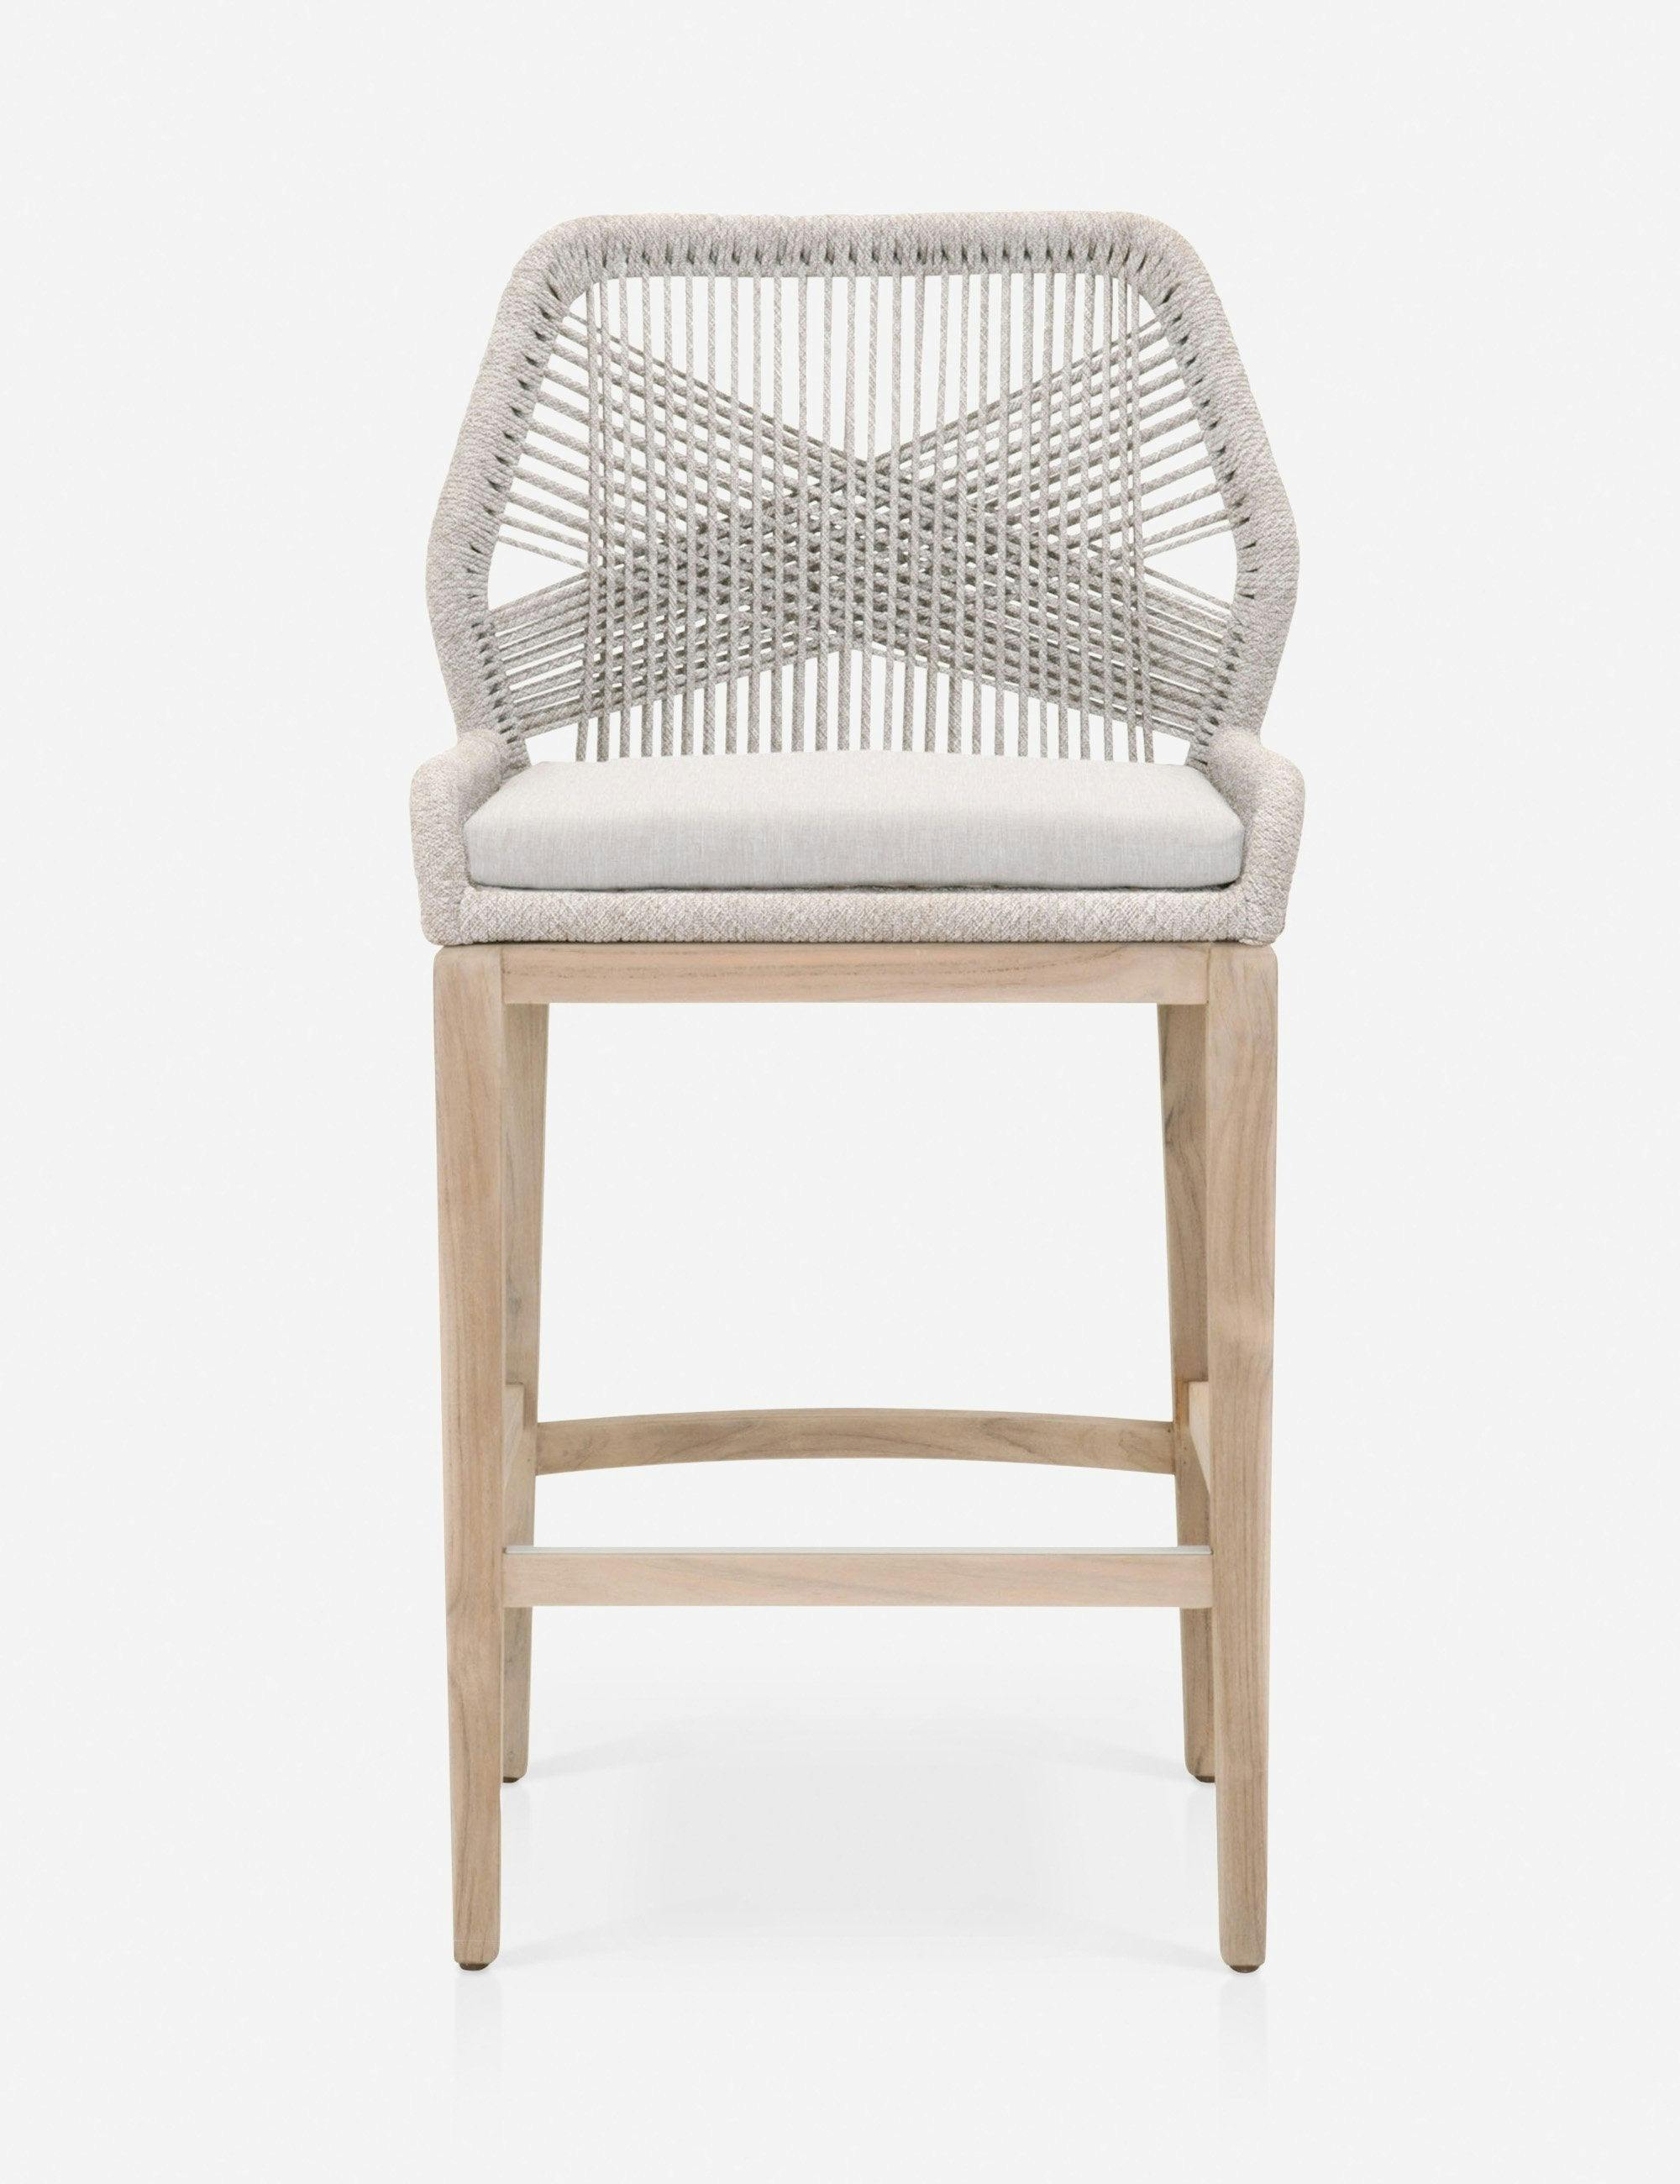 London Taupe Woven Rope Outdoor Bar Stool